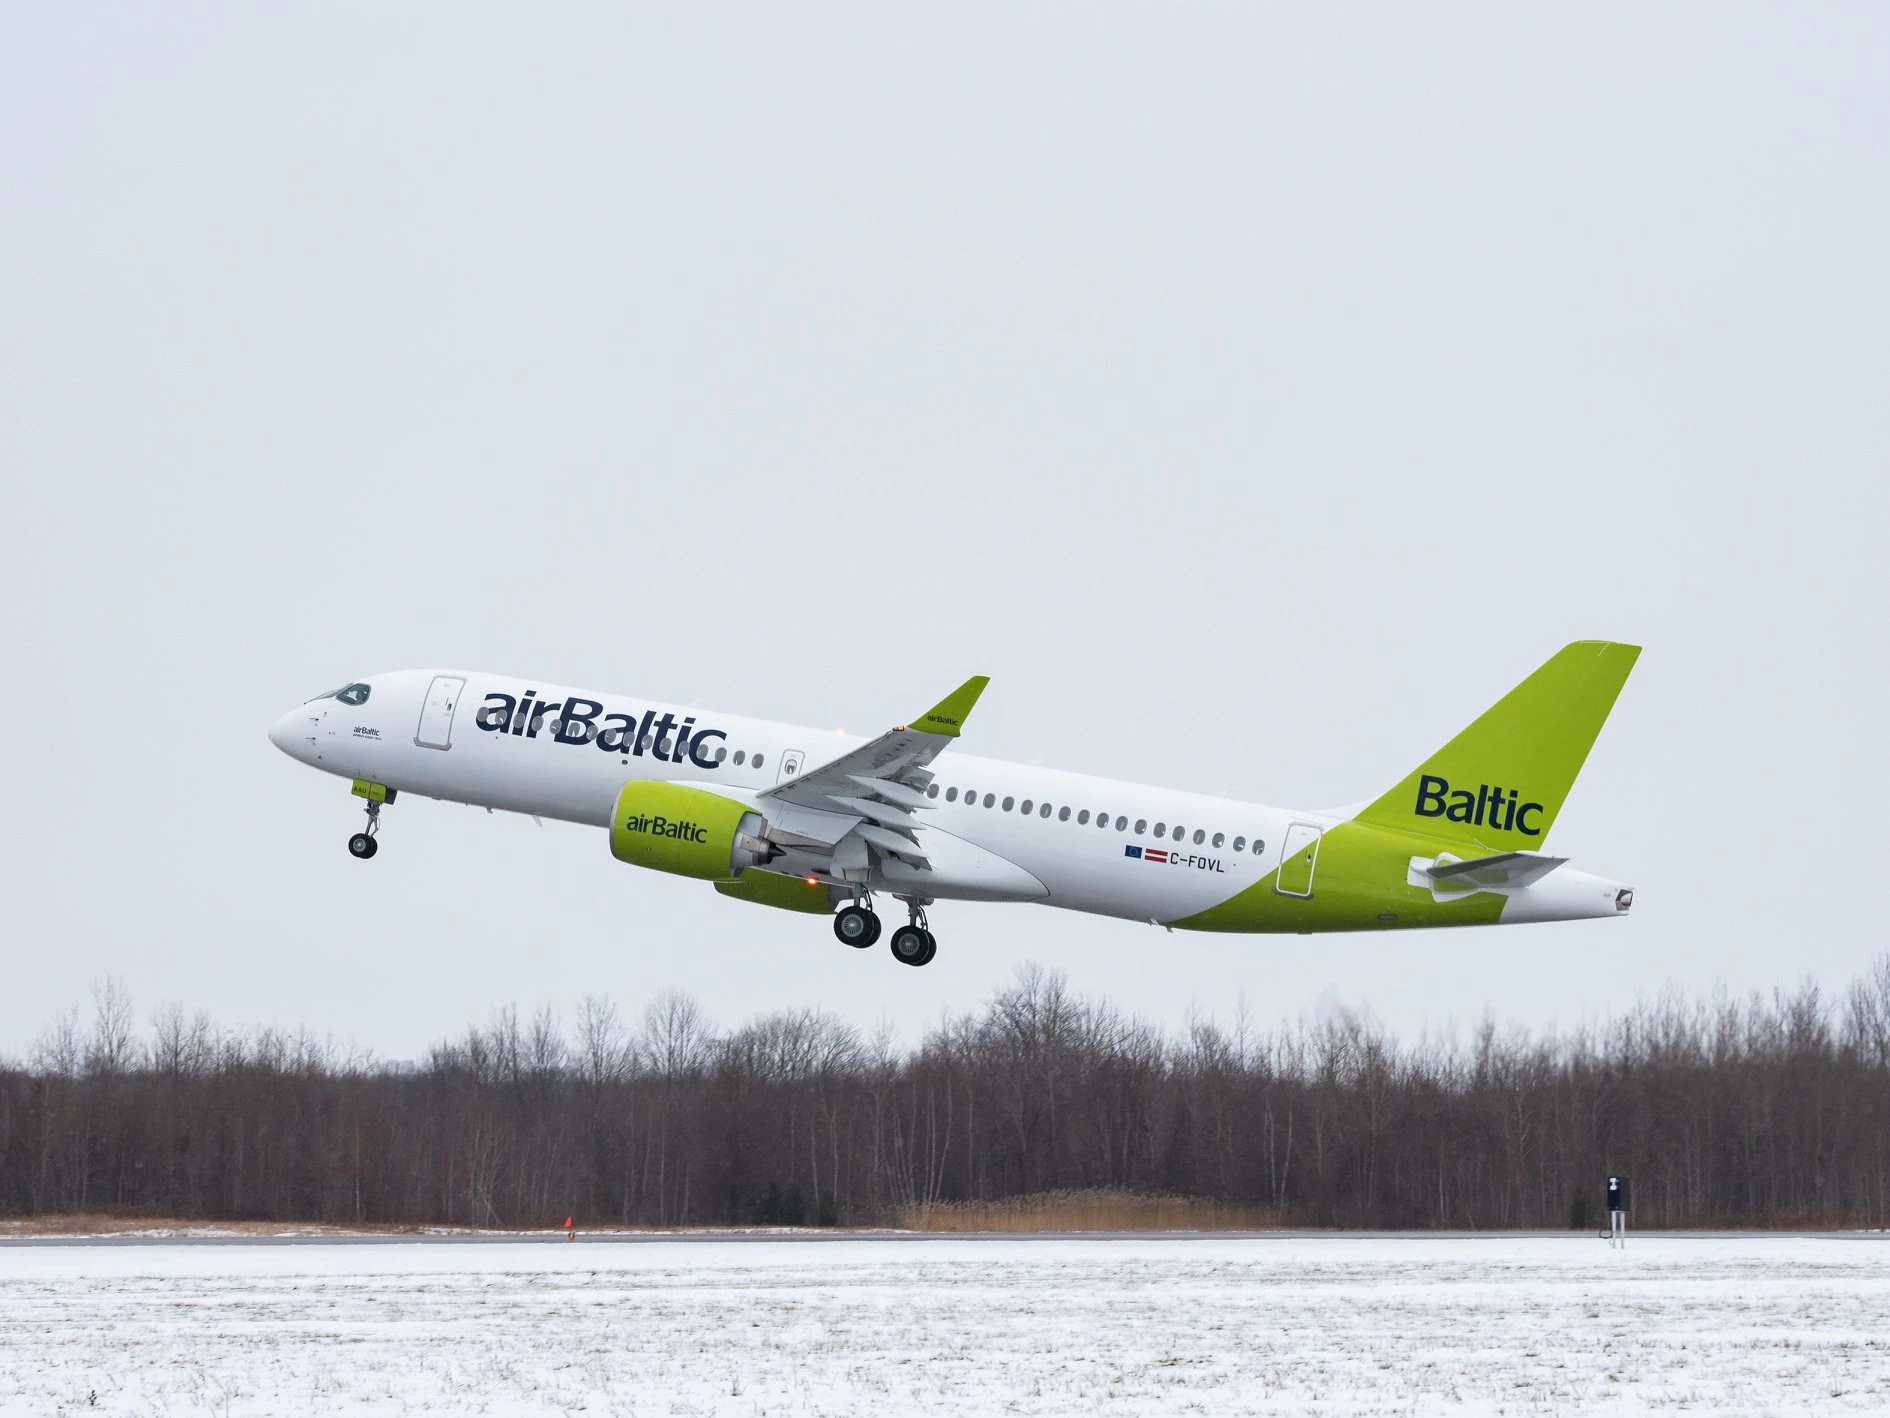 ParkVia wins third airBaltic contract renewal